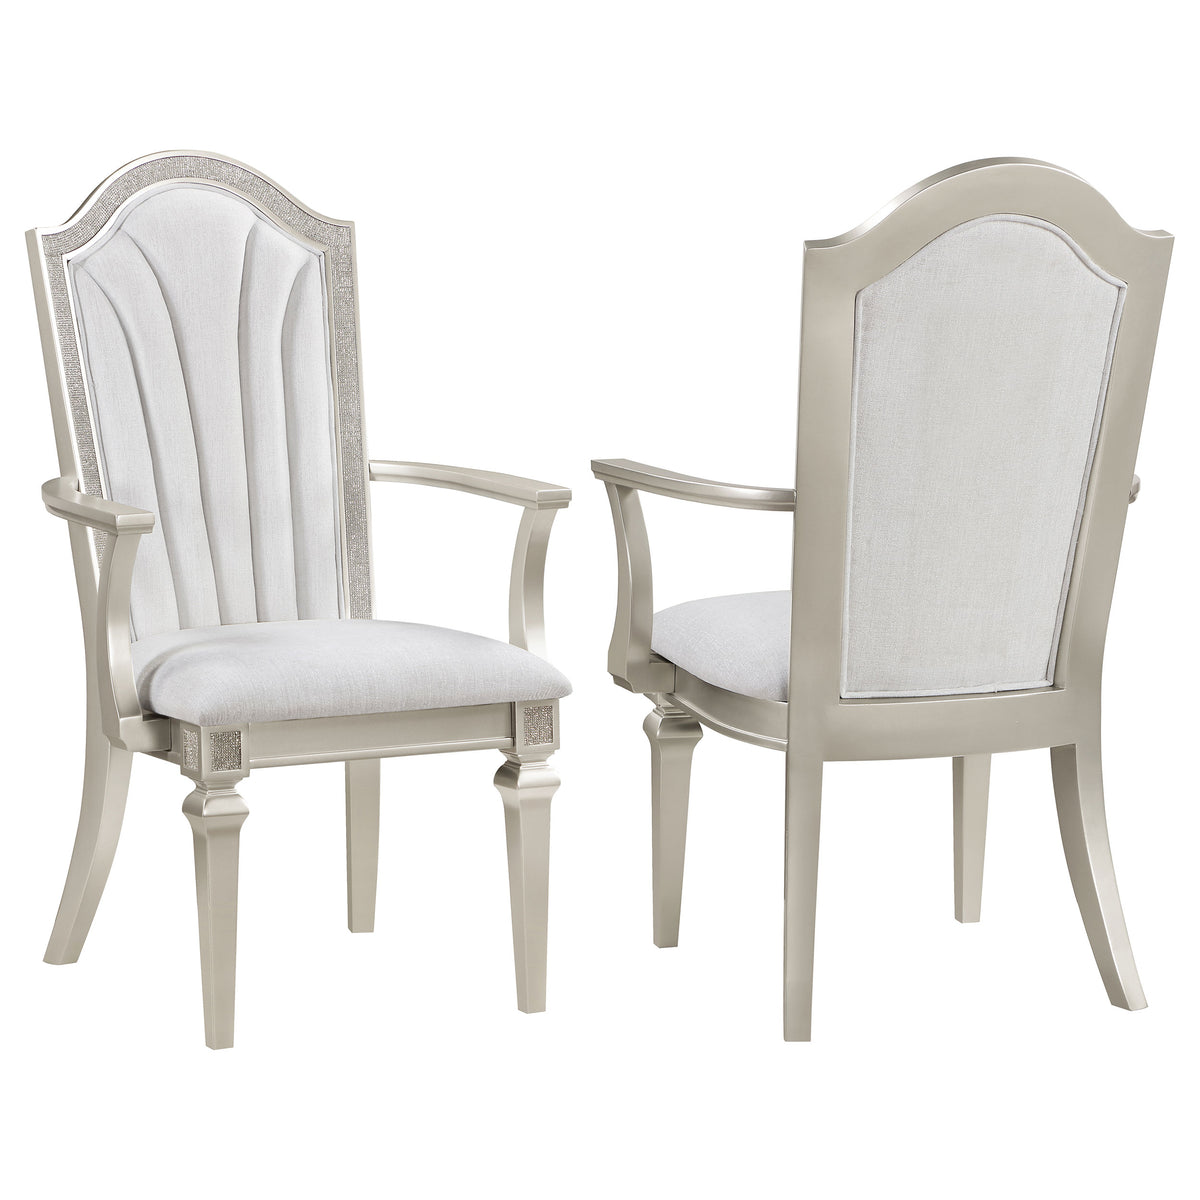 Evangeline Upholstered Dining Arm Chair with Faux Diamond Trim Ivory and Silver Oak (Set of 2)  Las Vegas Furniture Stores